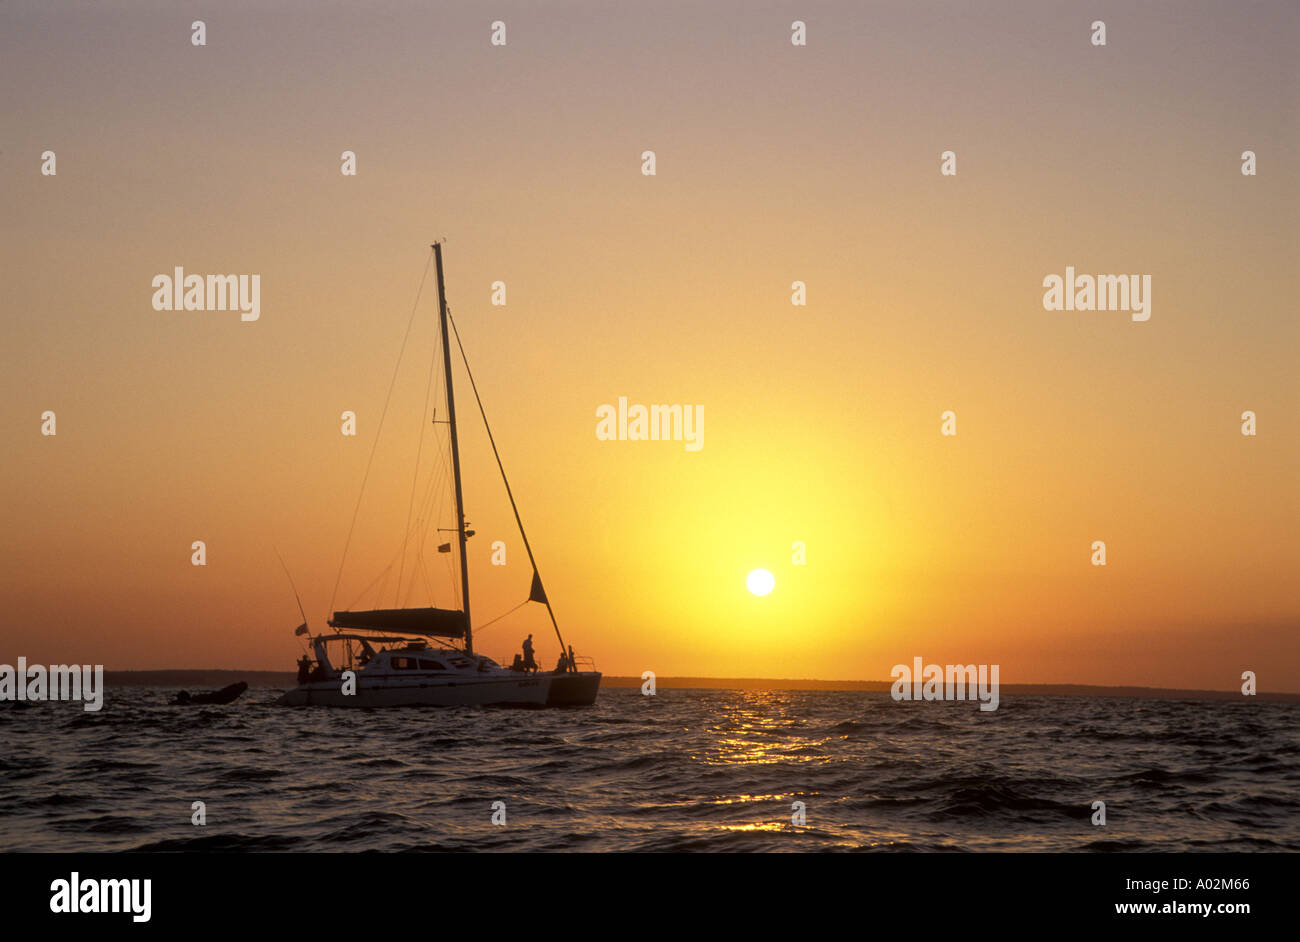 Sailing boat and the setting sun Mozambique Africa The sky is a warm red with a golden sun Stock Photo